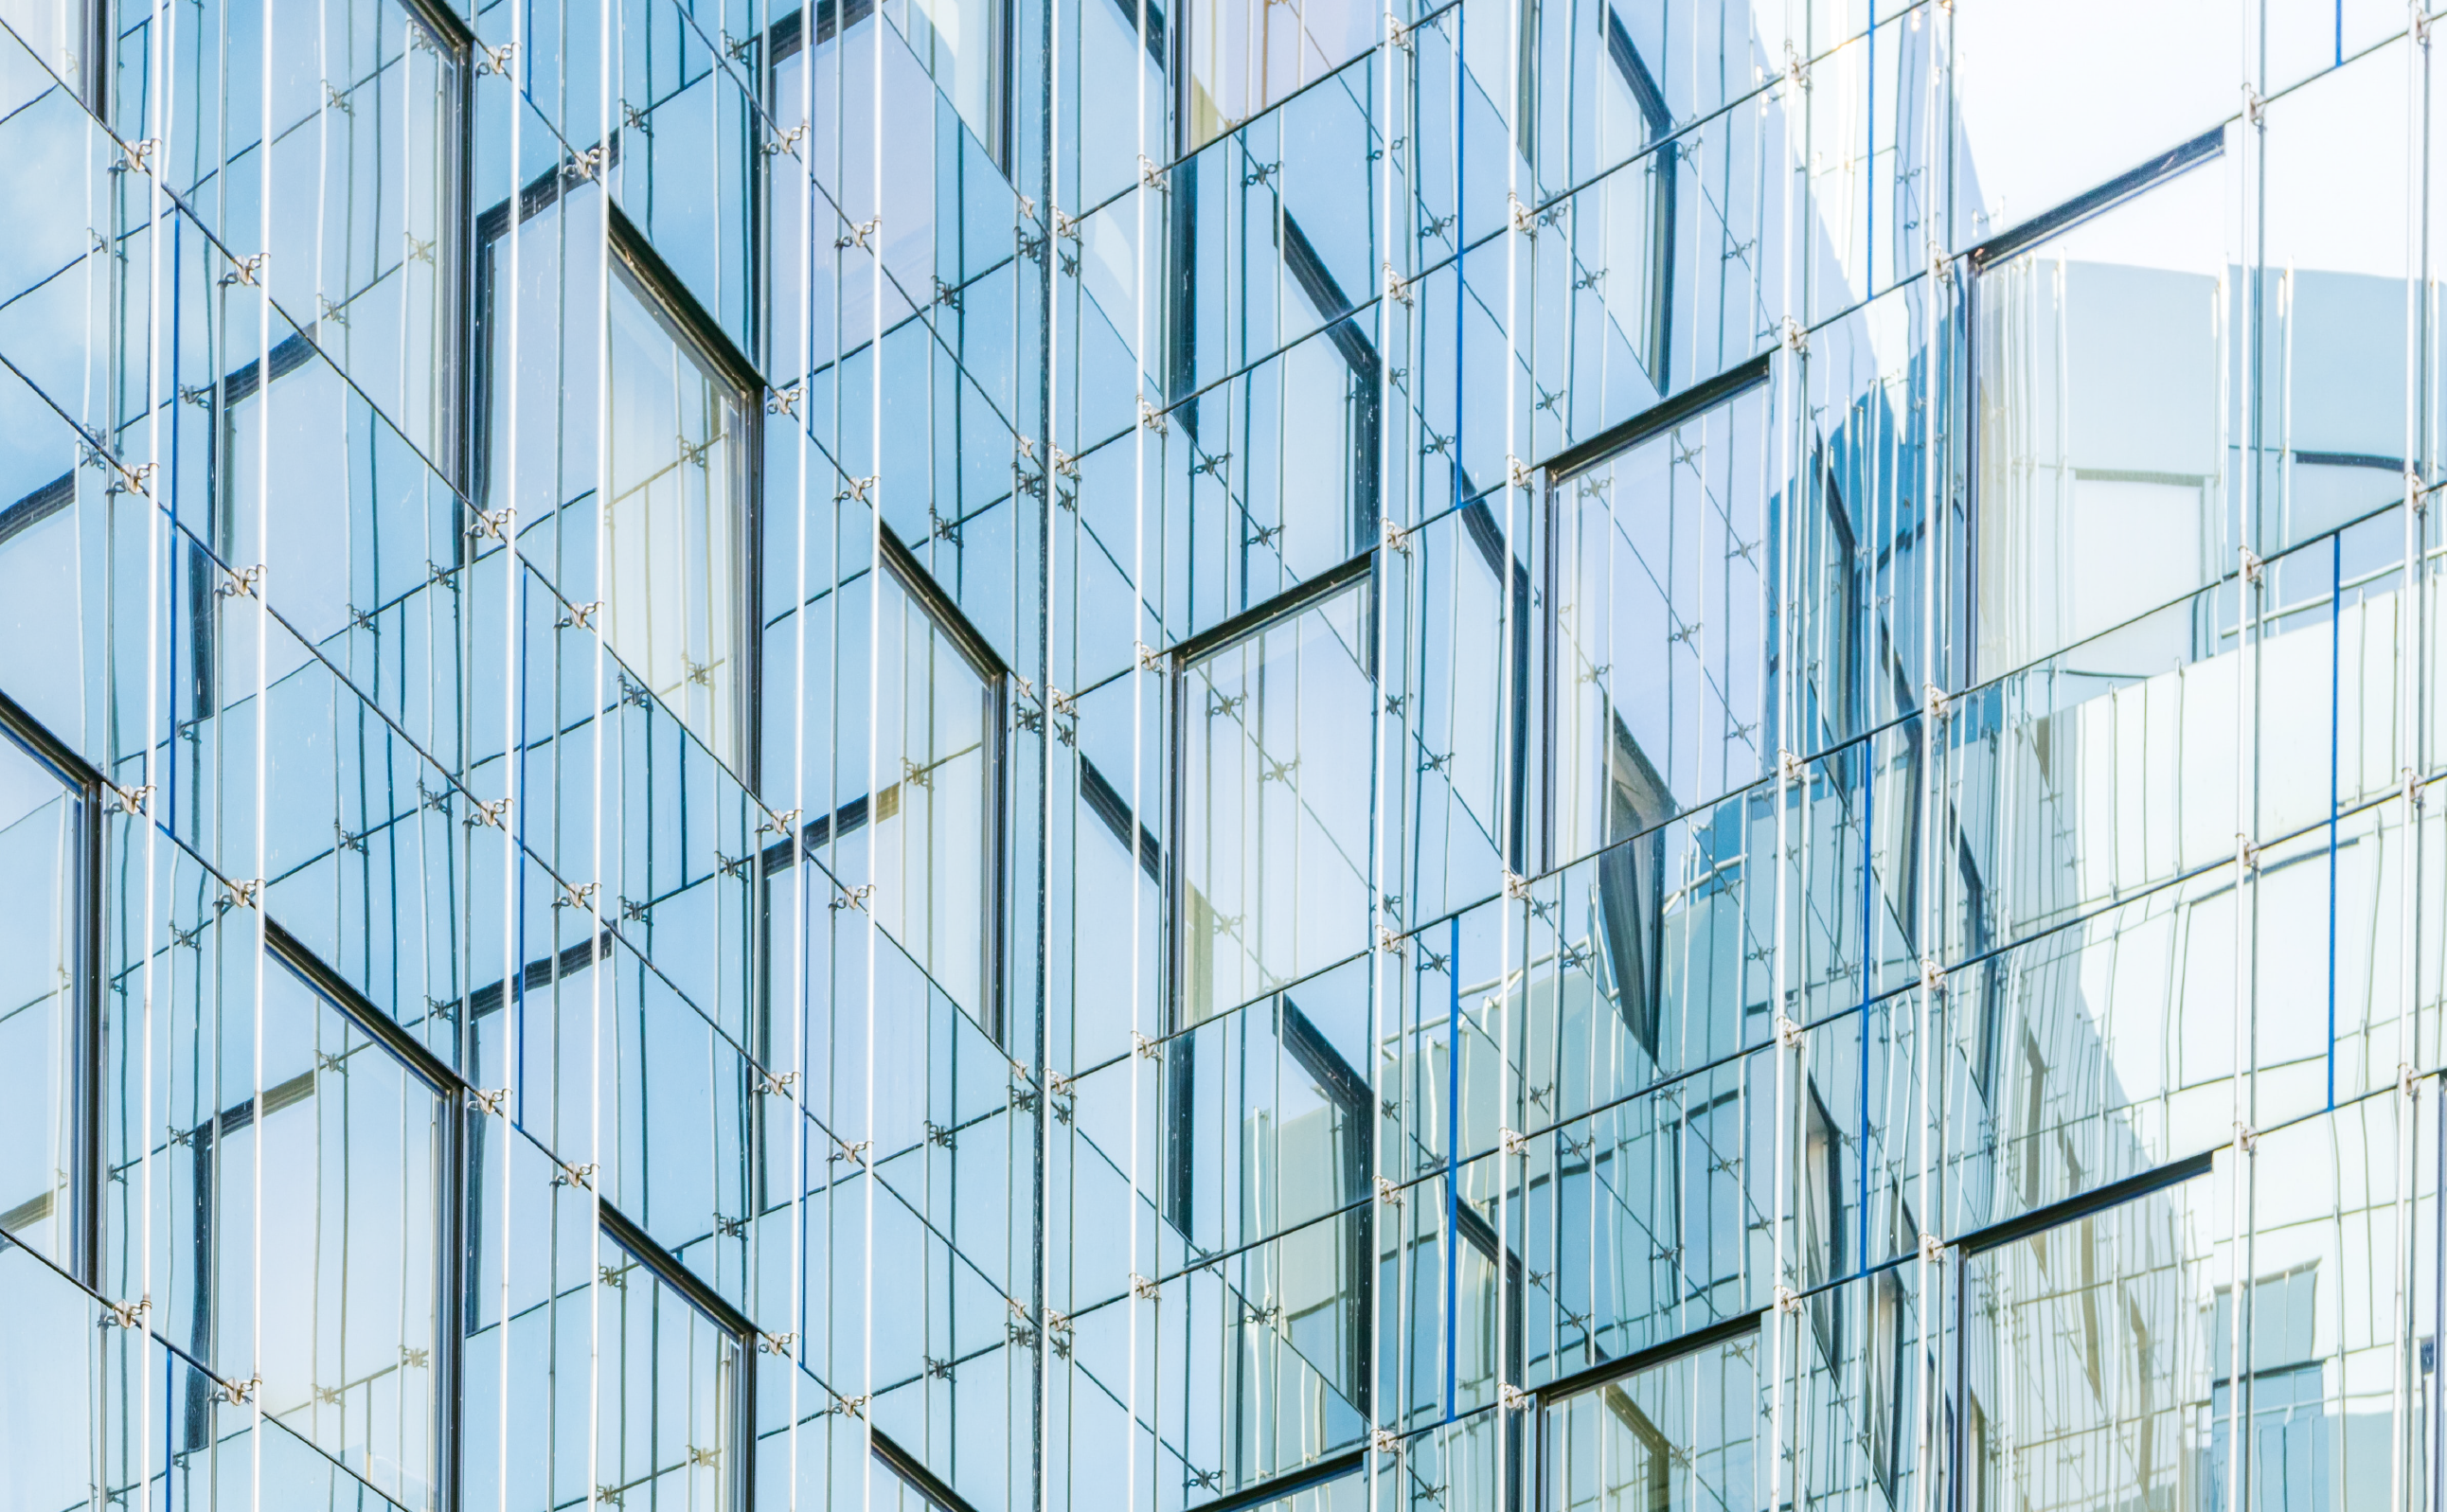 Architectural photography of glass building